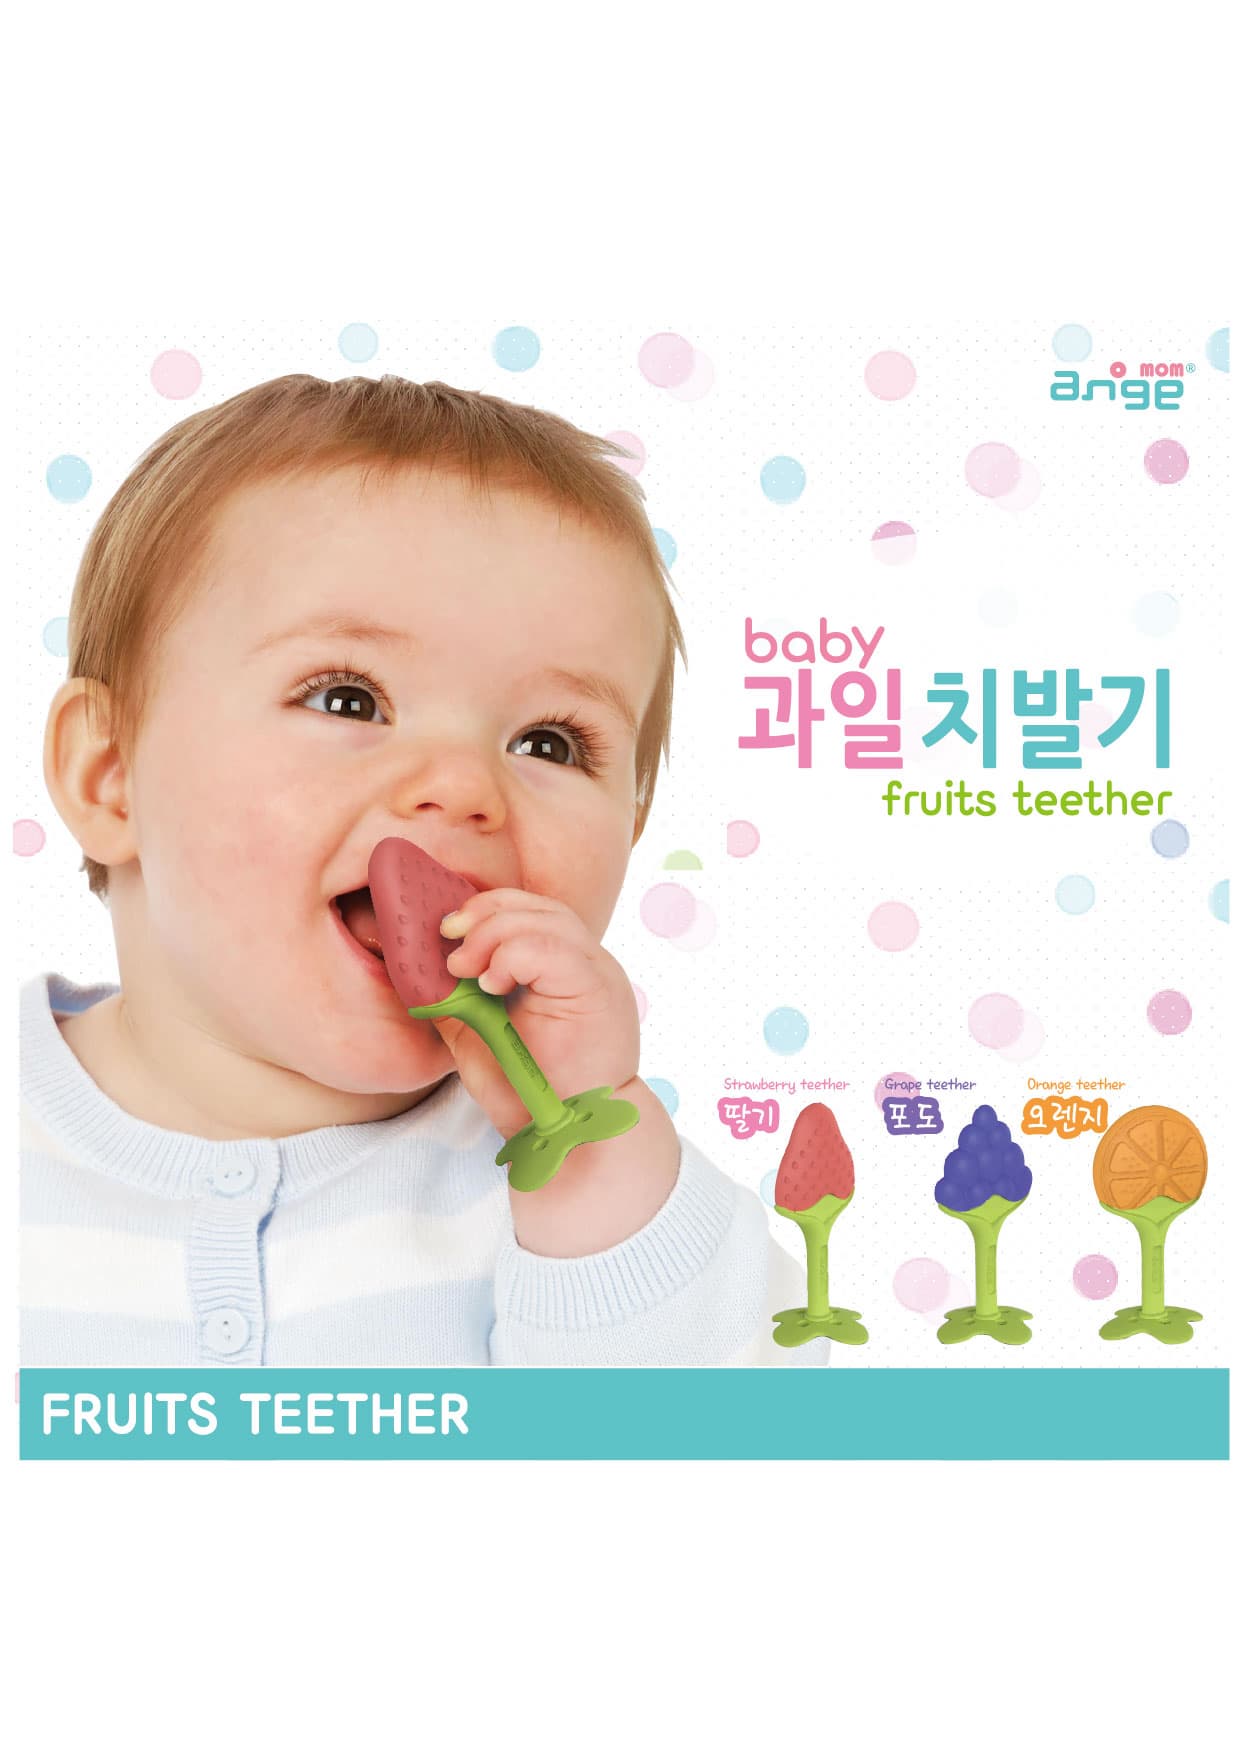 A fruit teether